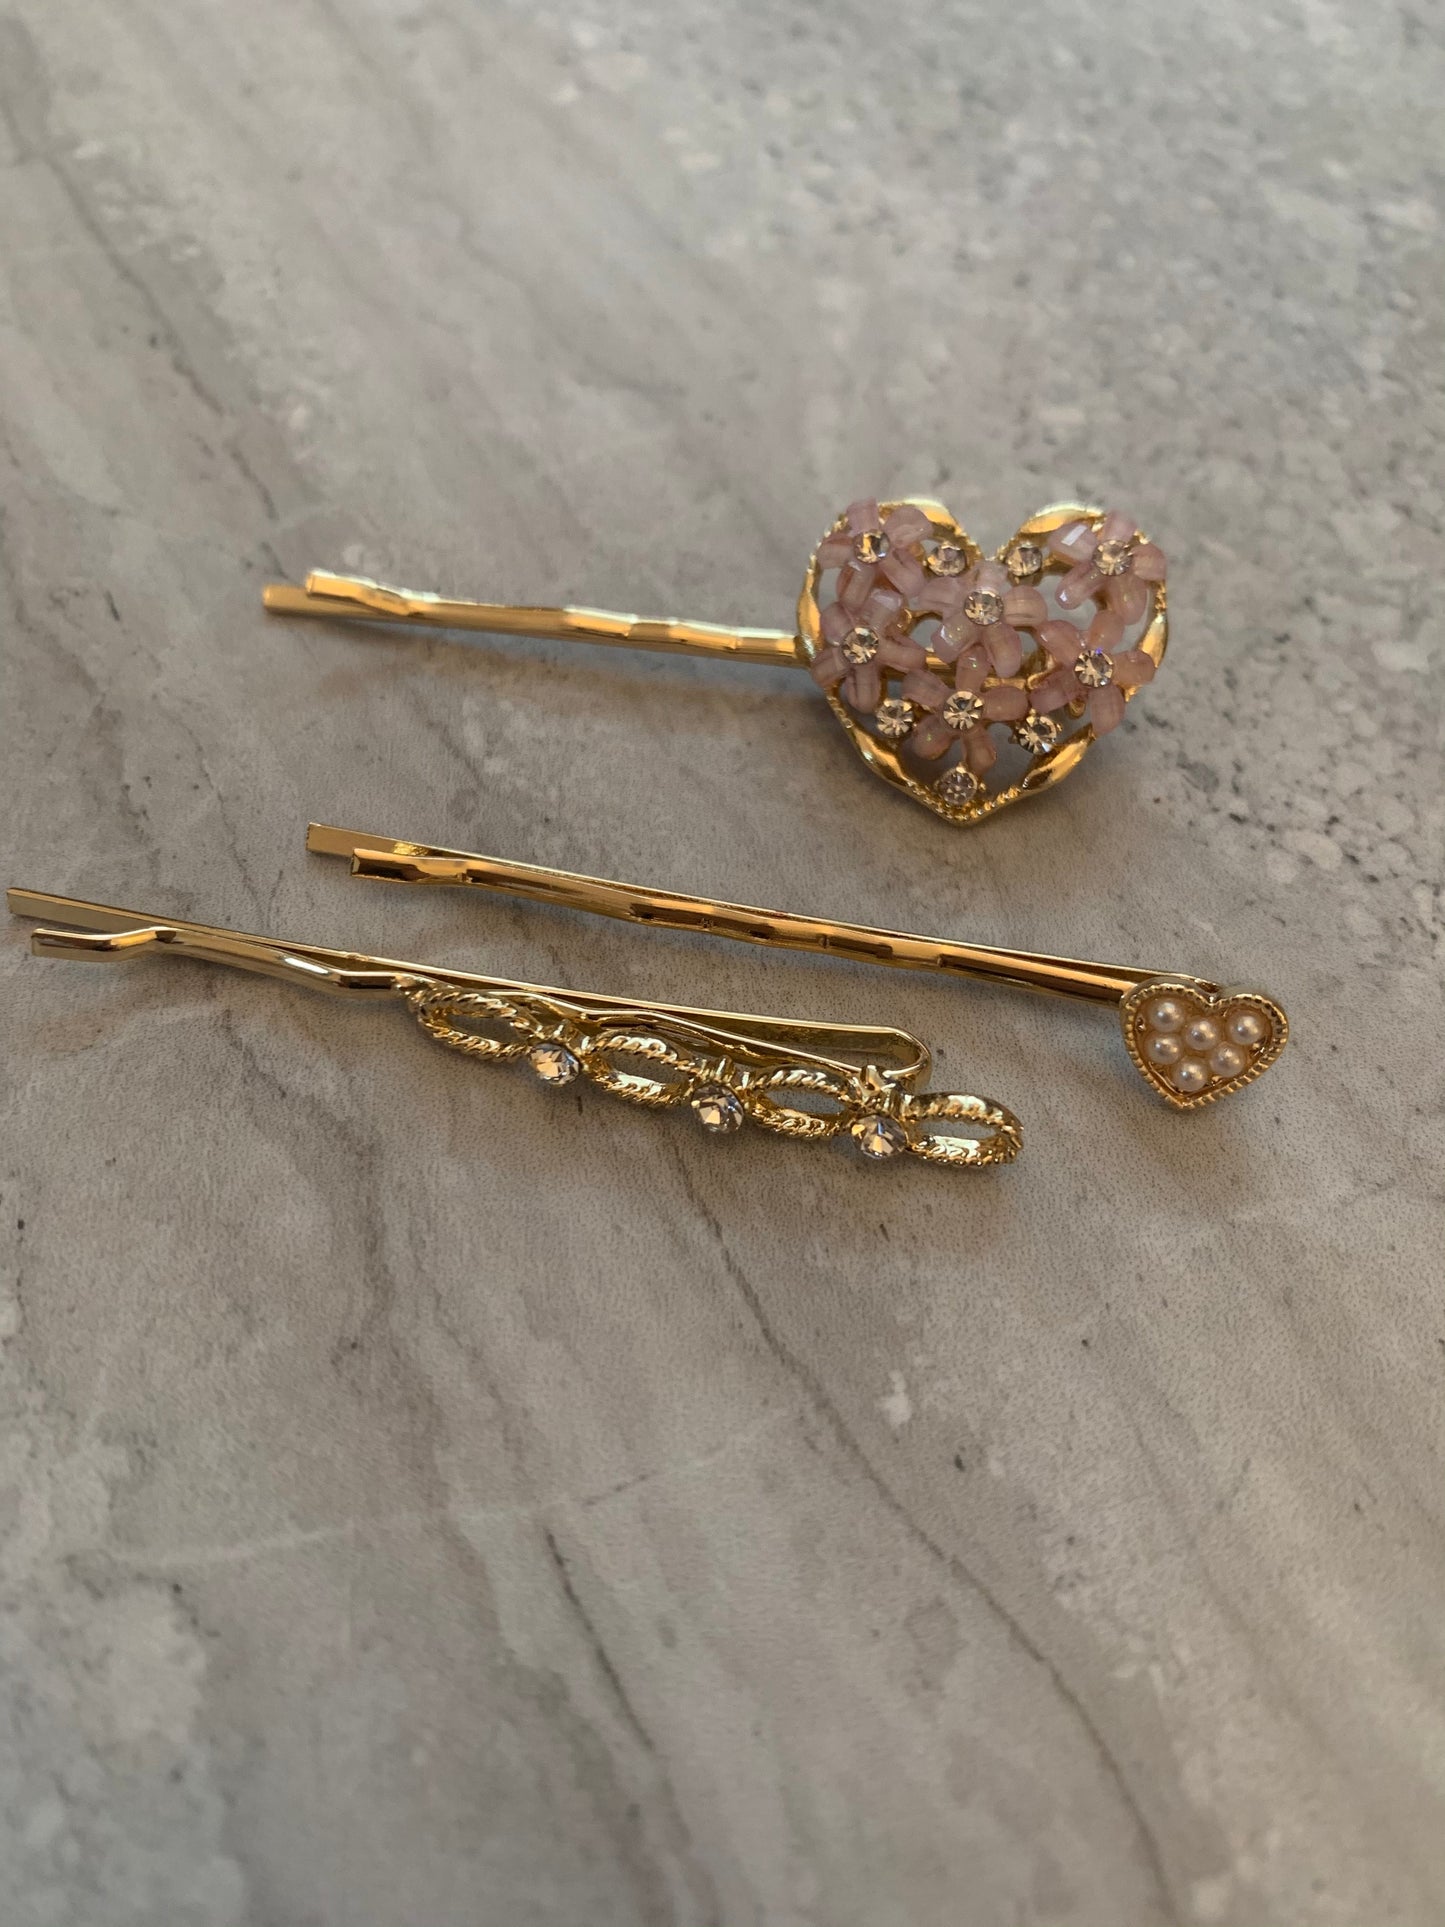 Vintage inspired hair clips